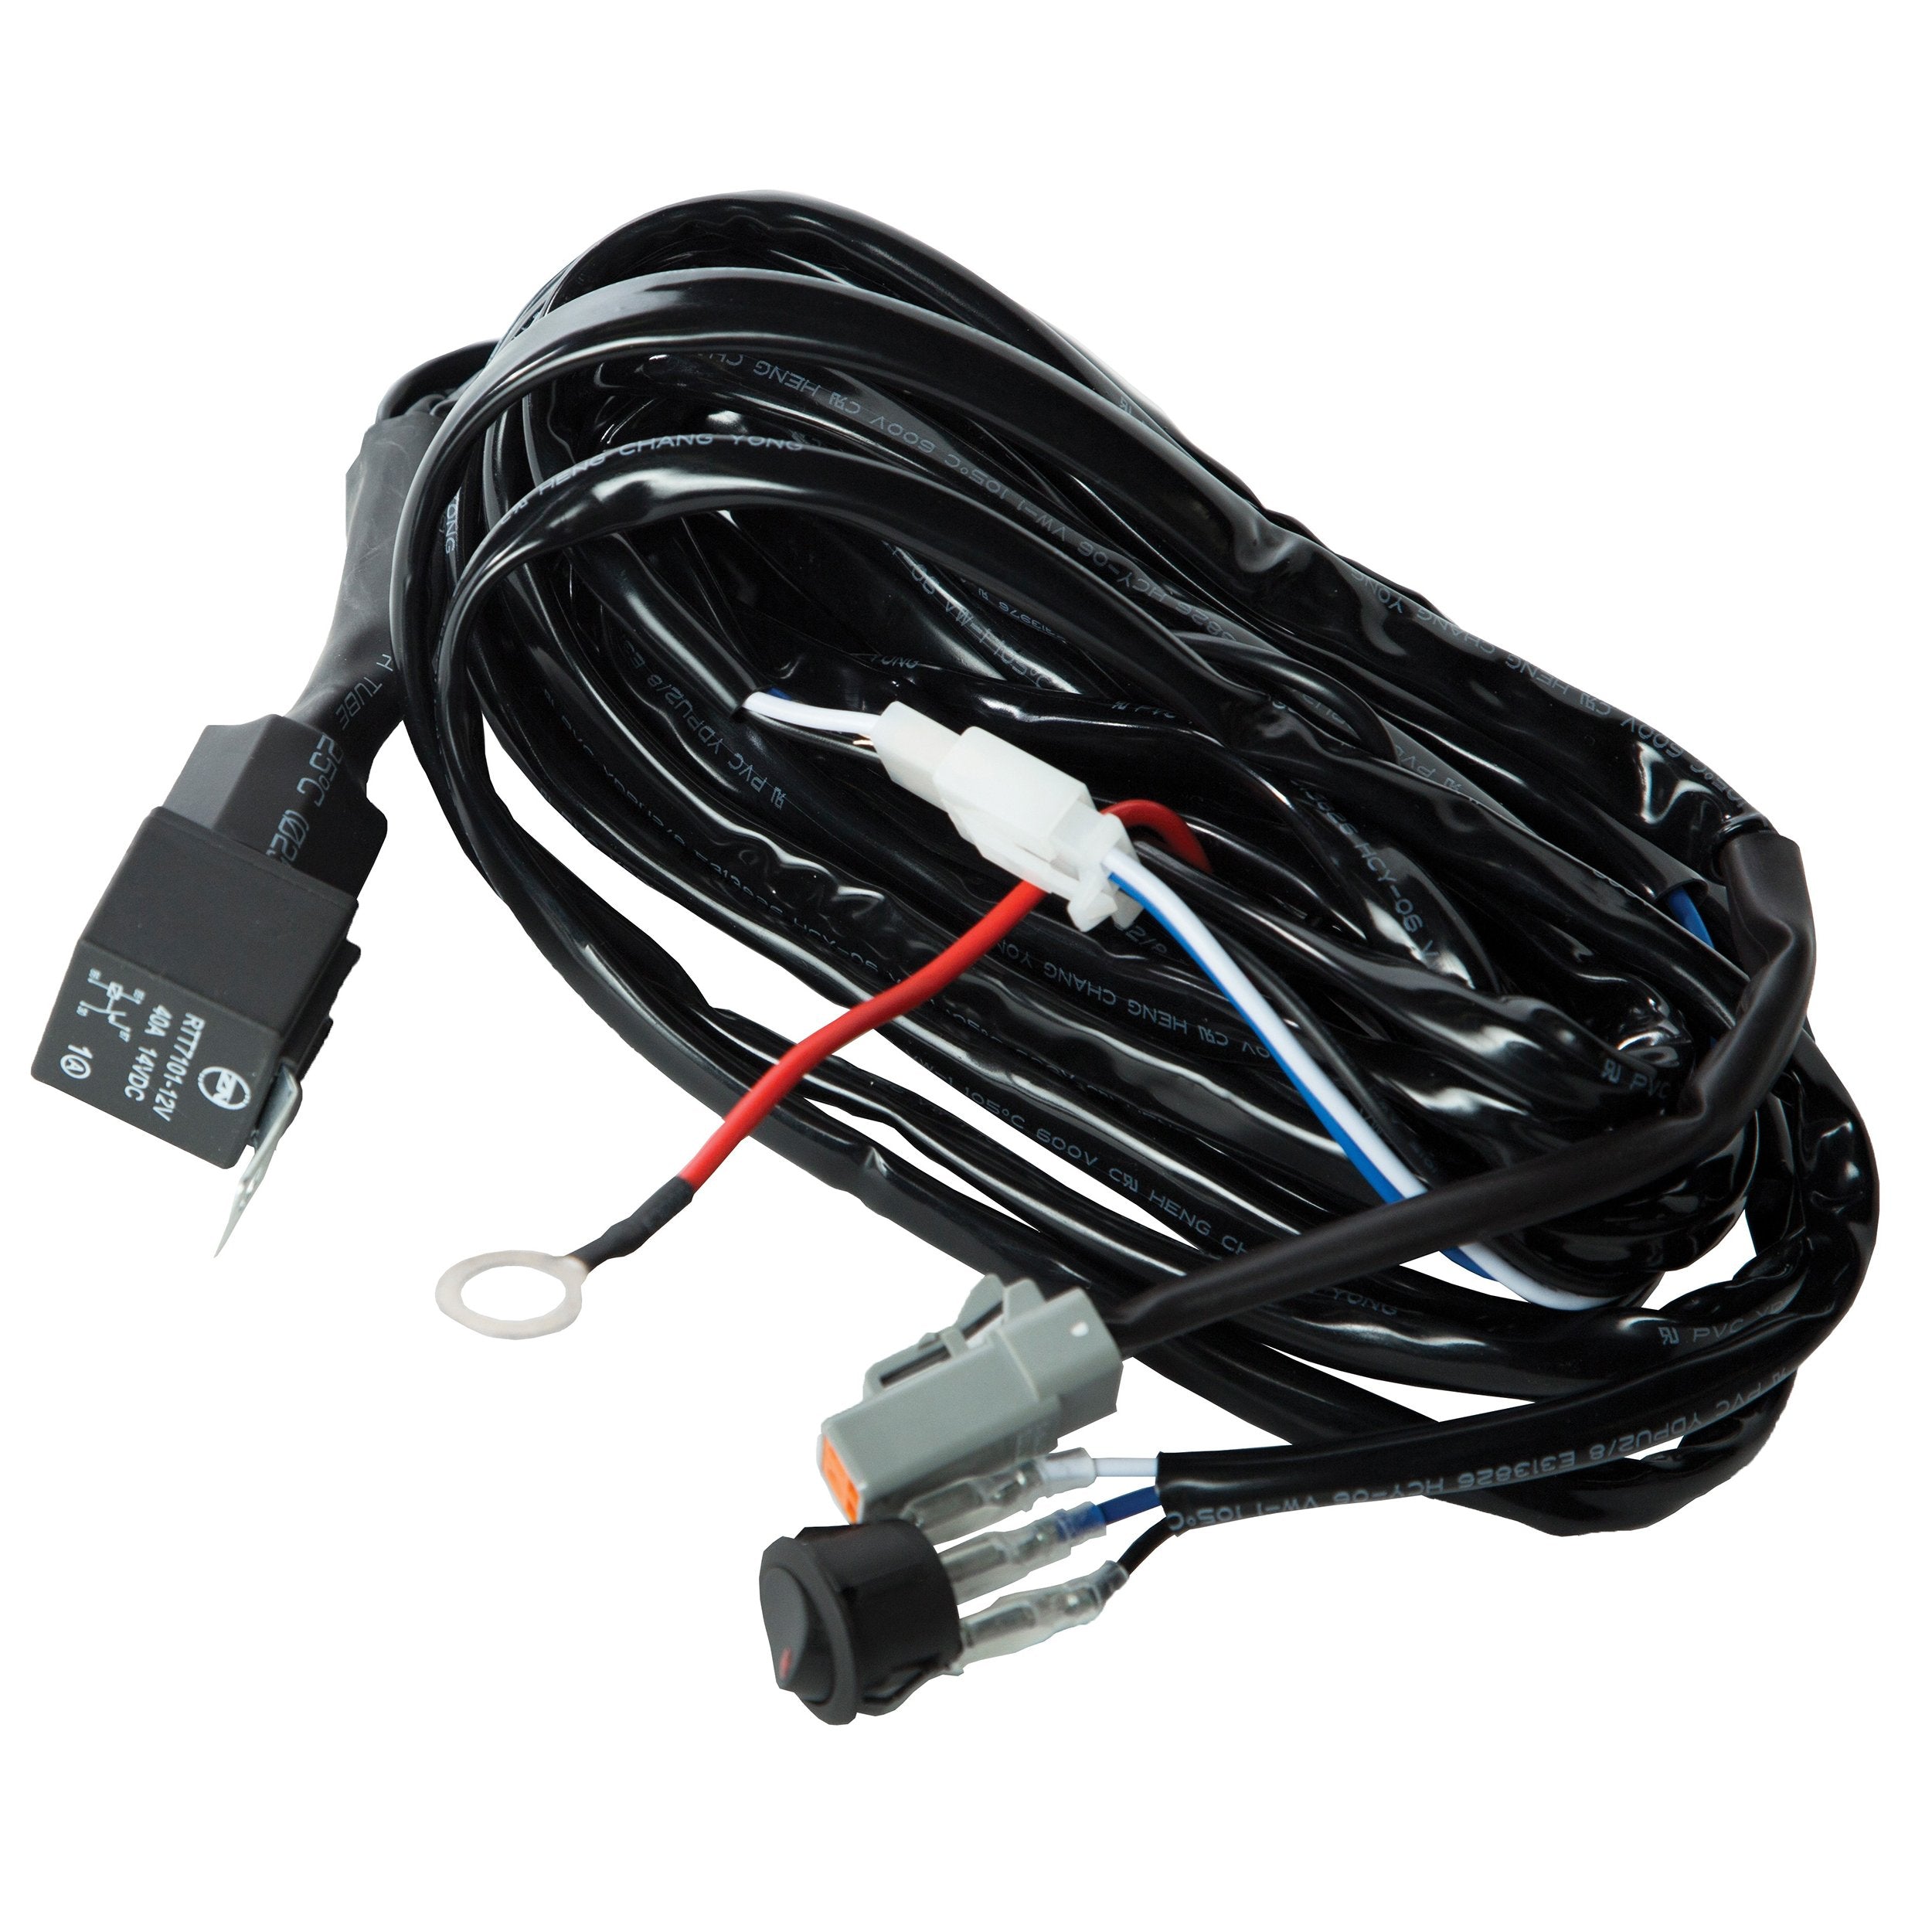 1 Light High Power Wiring Harness For